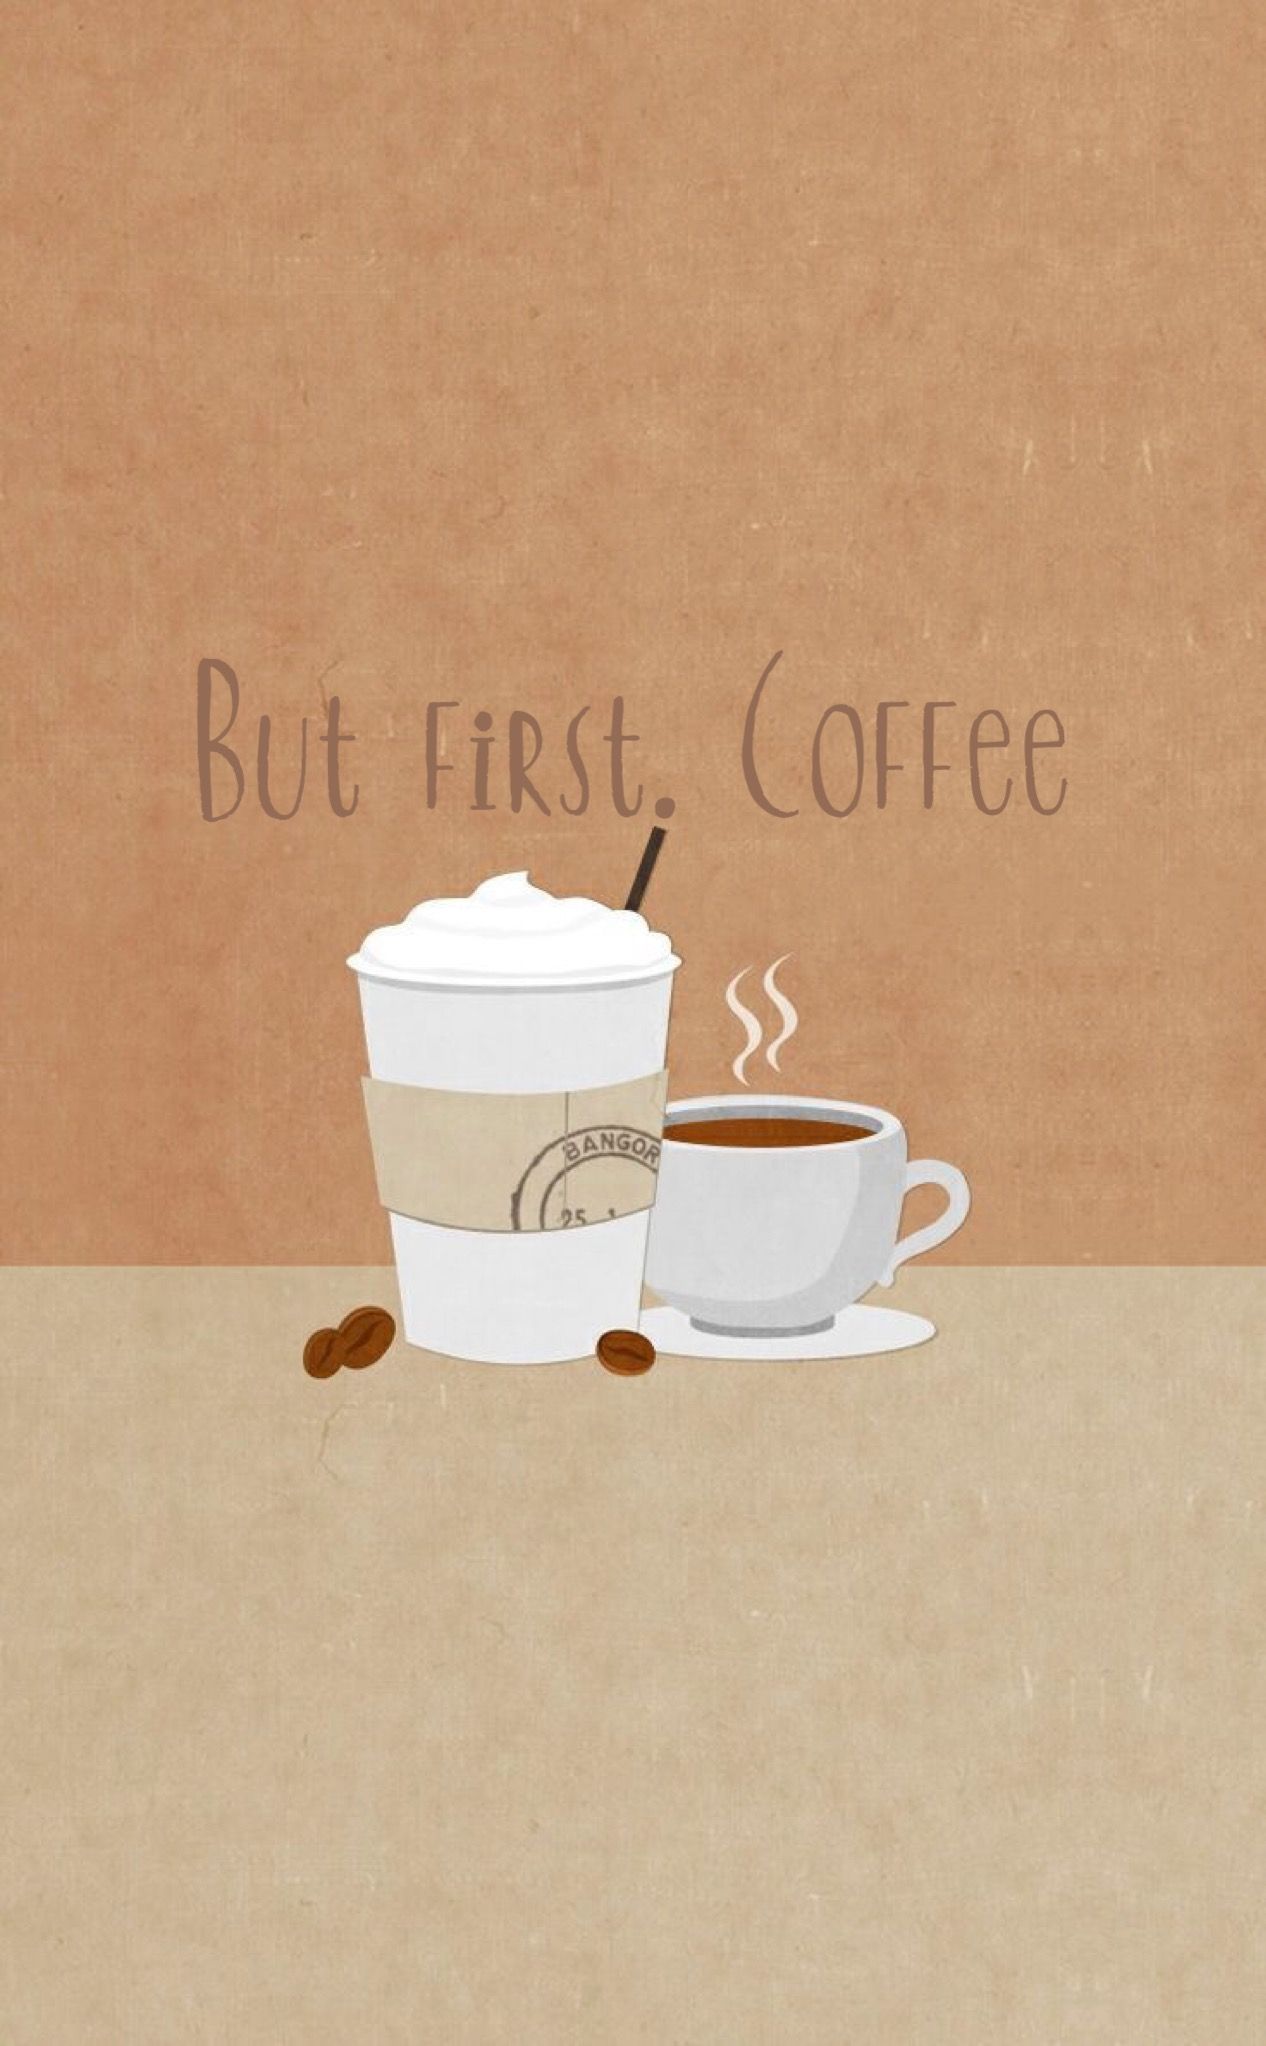 but first coffee!!. Coffee wallpaper iphone, Coffee wallpaper, iPhone wallpaper vintage